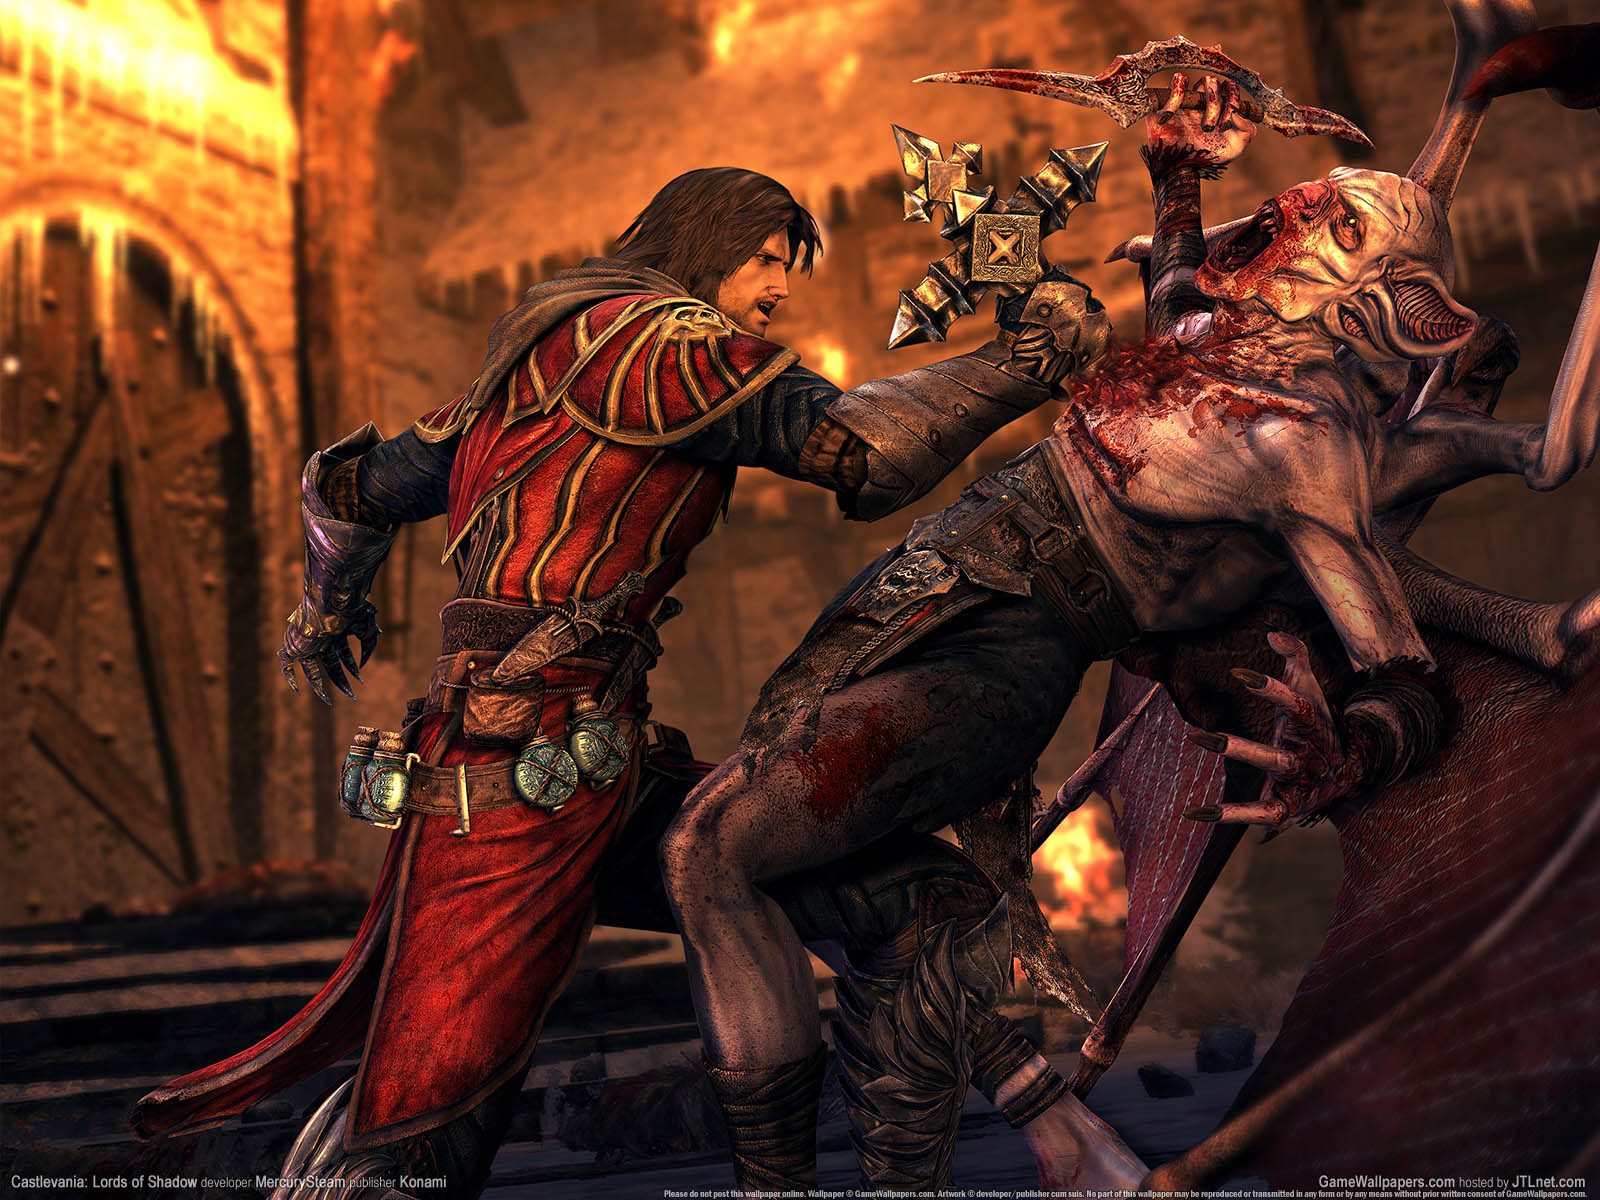 Castlevania: Lords of Shadow achtergrond 04 1600x1200